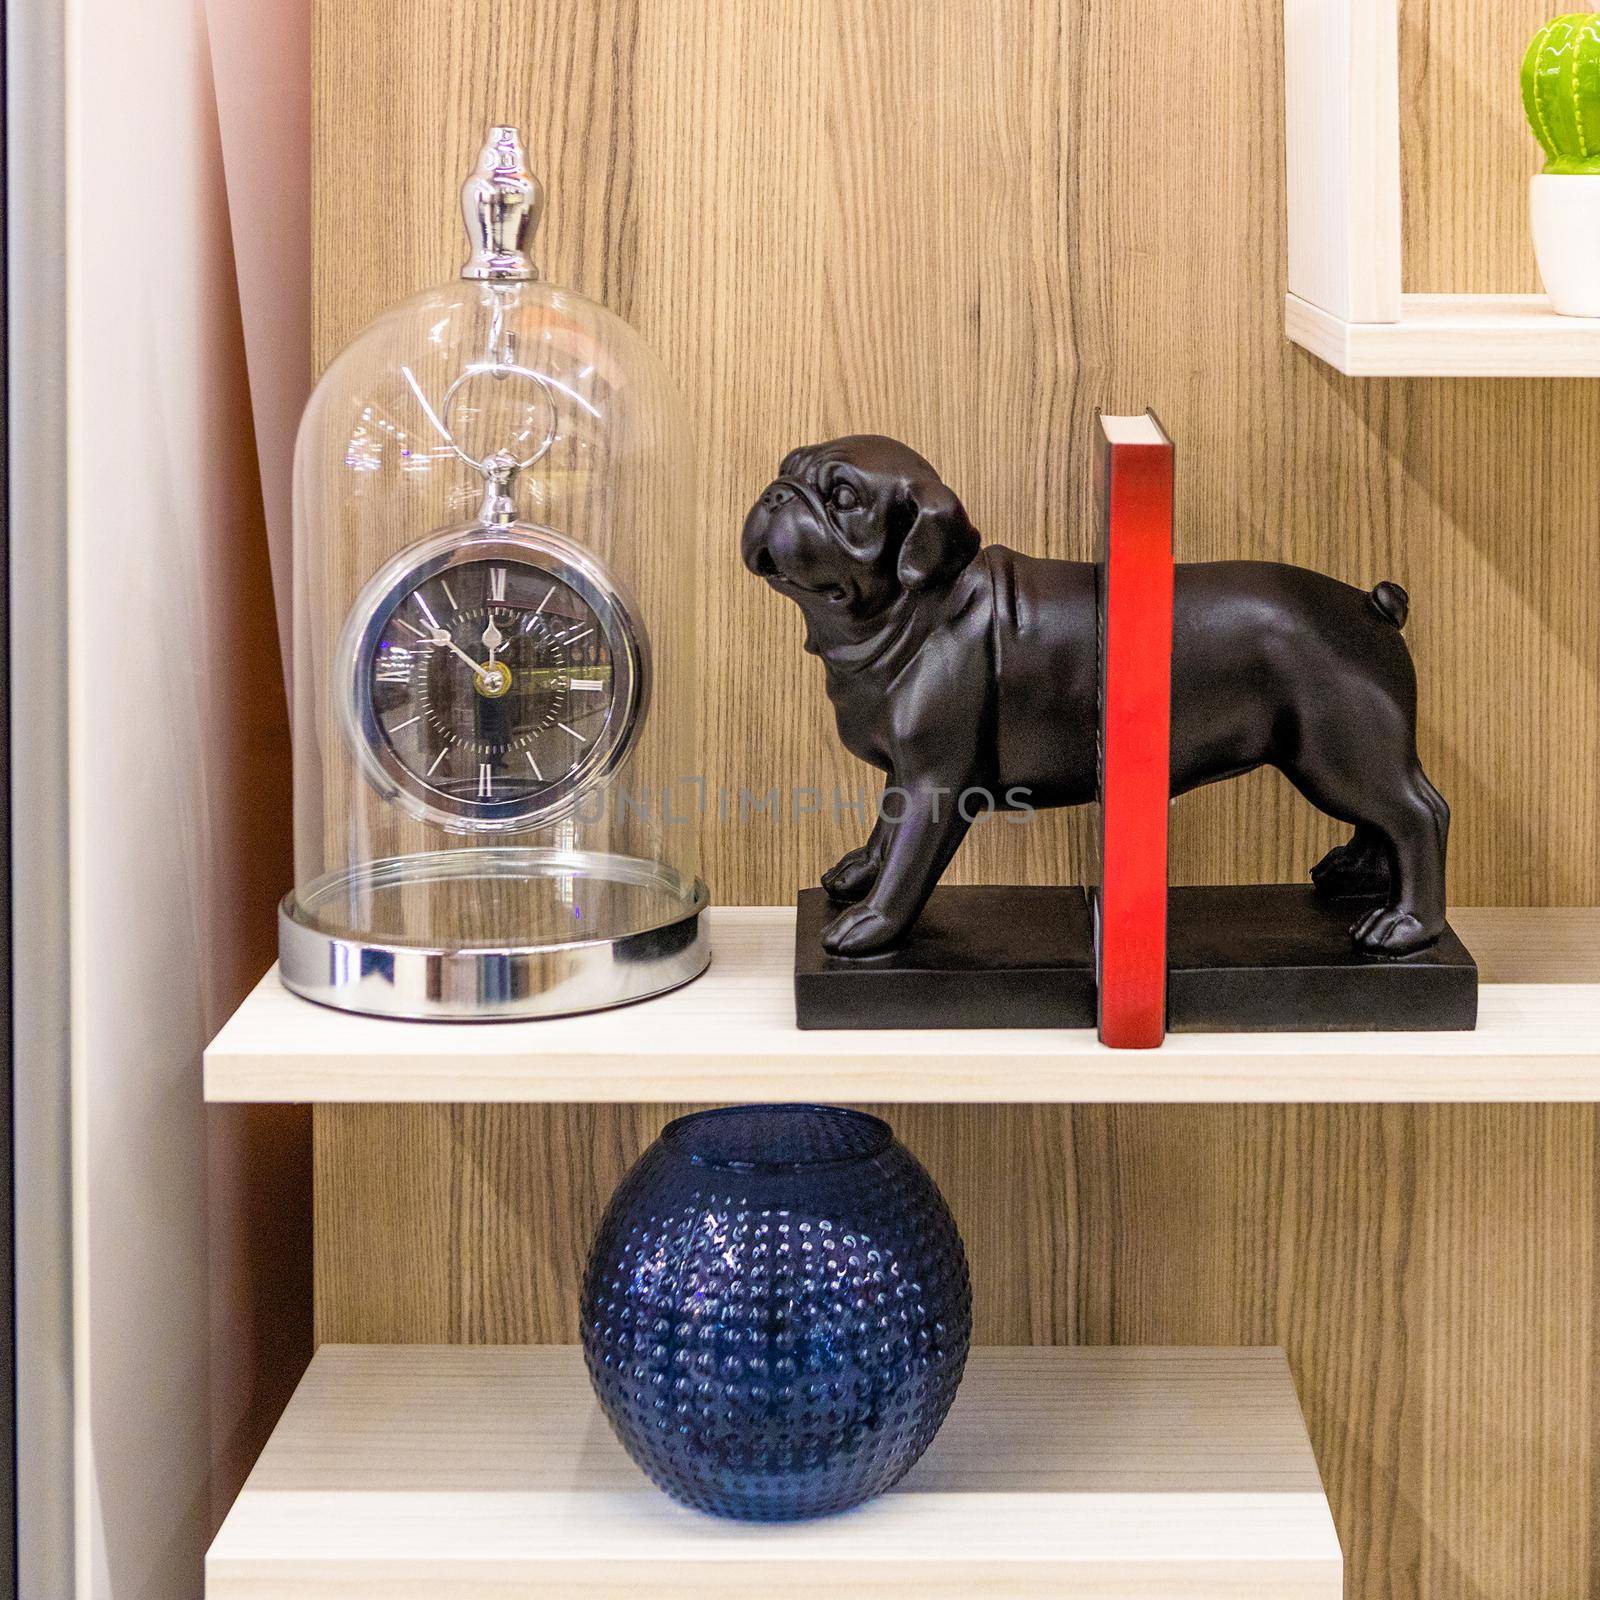 Dog clock decor for home isolated